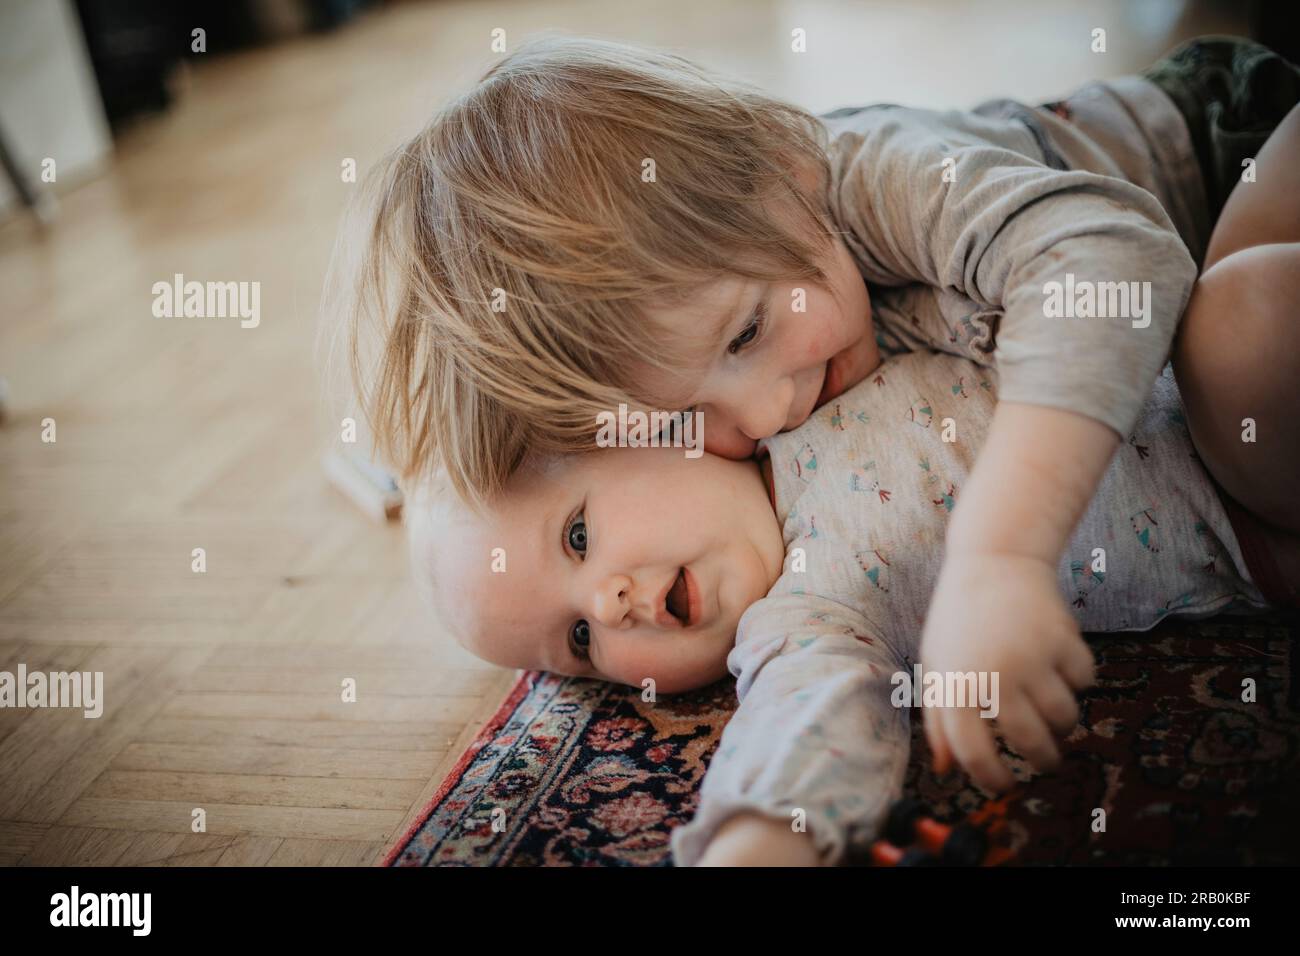 Siblings cuddle on the floor Stock Photo